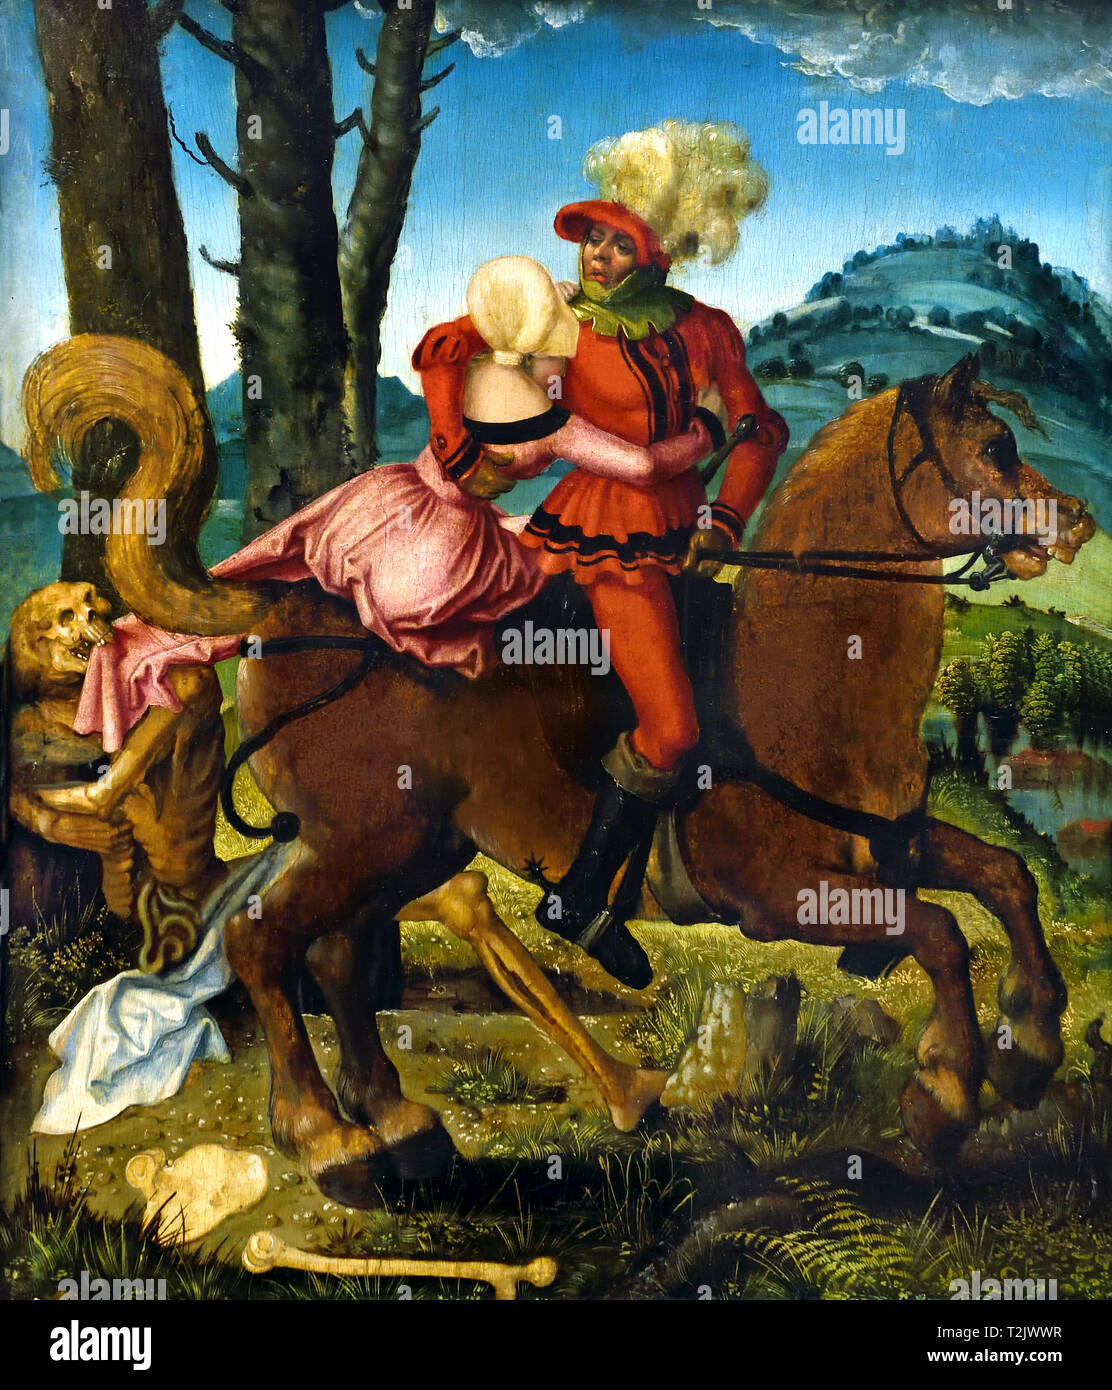 The Knight, The Young Girl and Death 1498 15th Century Hans Baldung Grien 1484-1545 German Germany Stock Photo